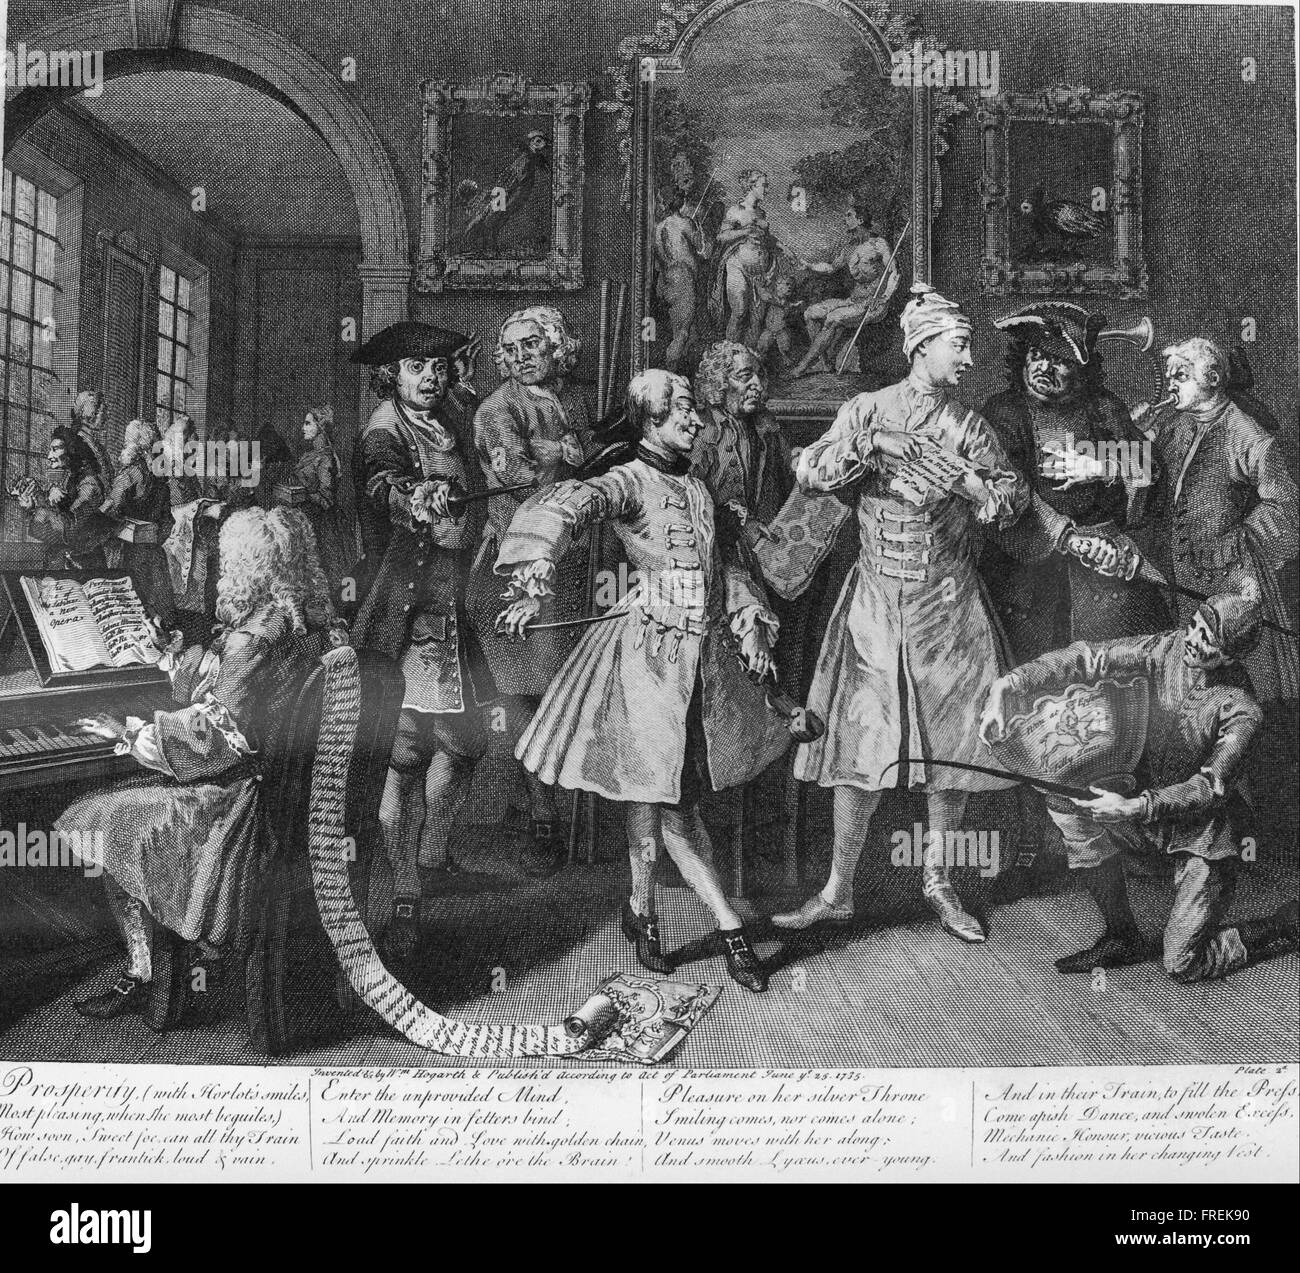 William Hogarth - A Rake's Progress, Plate 2, Surrounded by Artists and Professors Stock Photo